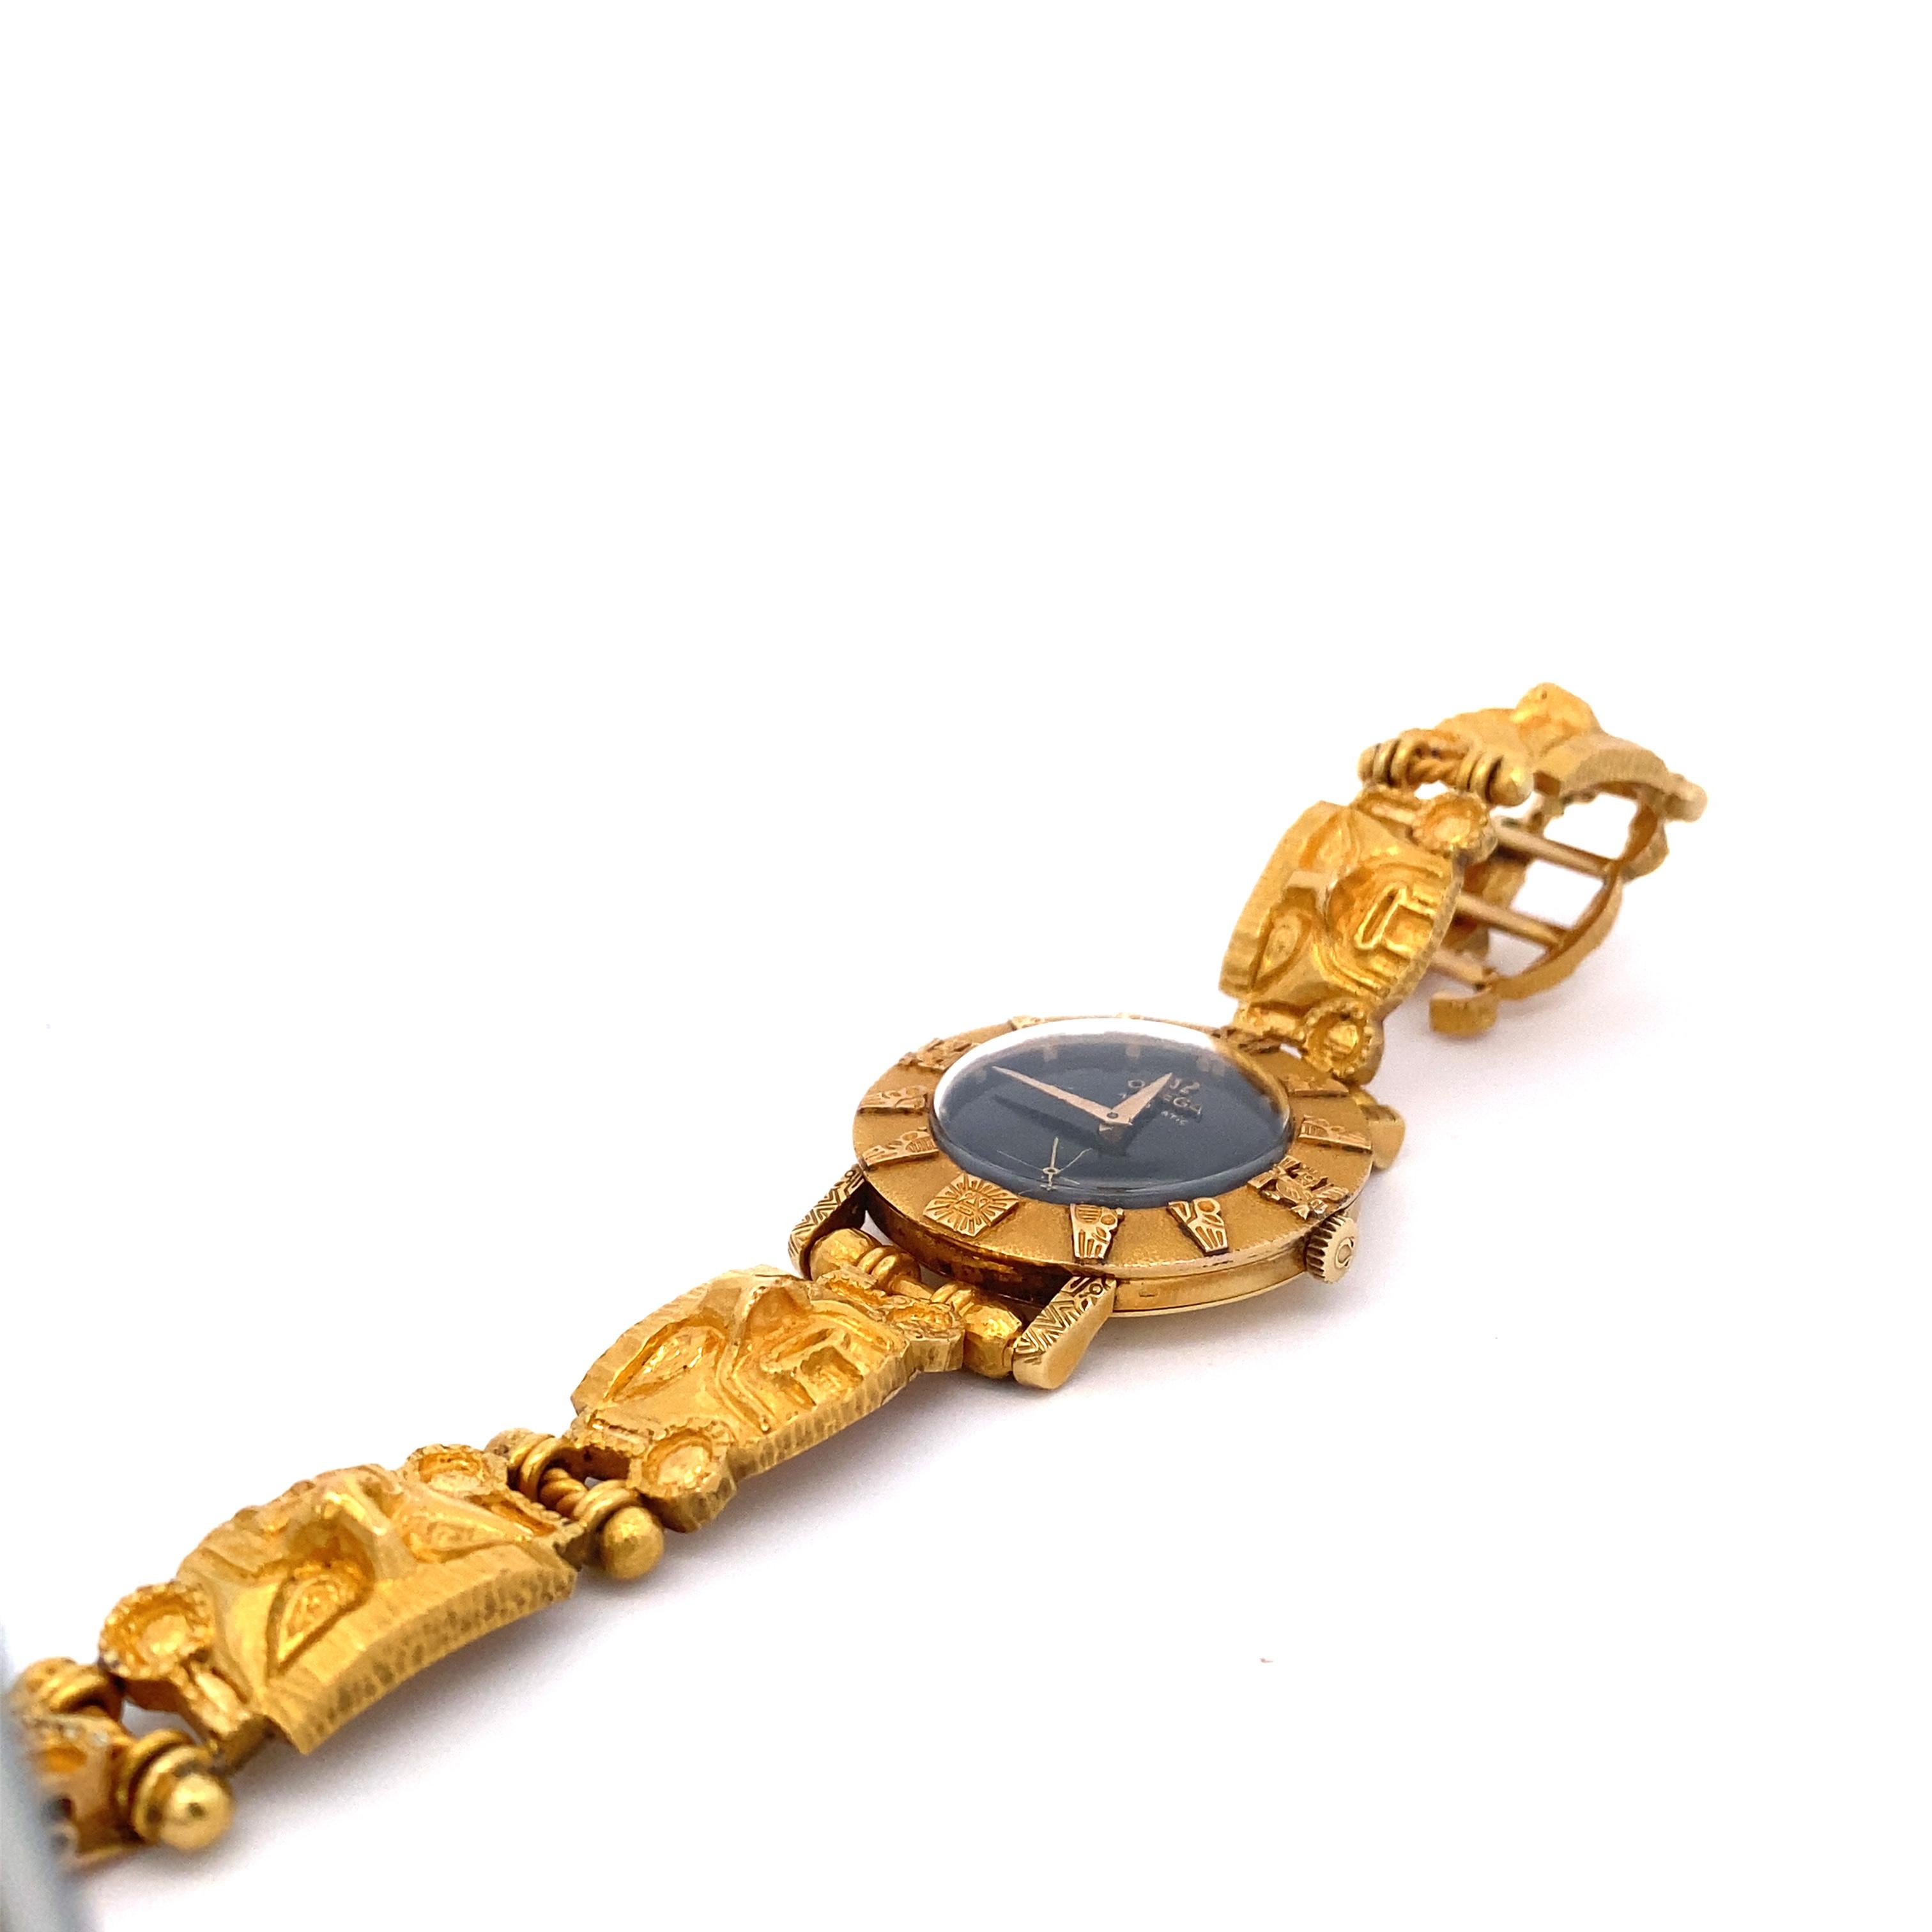 Omega Mechanical Watch with Custom Made Solid Gold Peruvian Moche Case and Brace For Sale 1